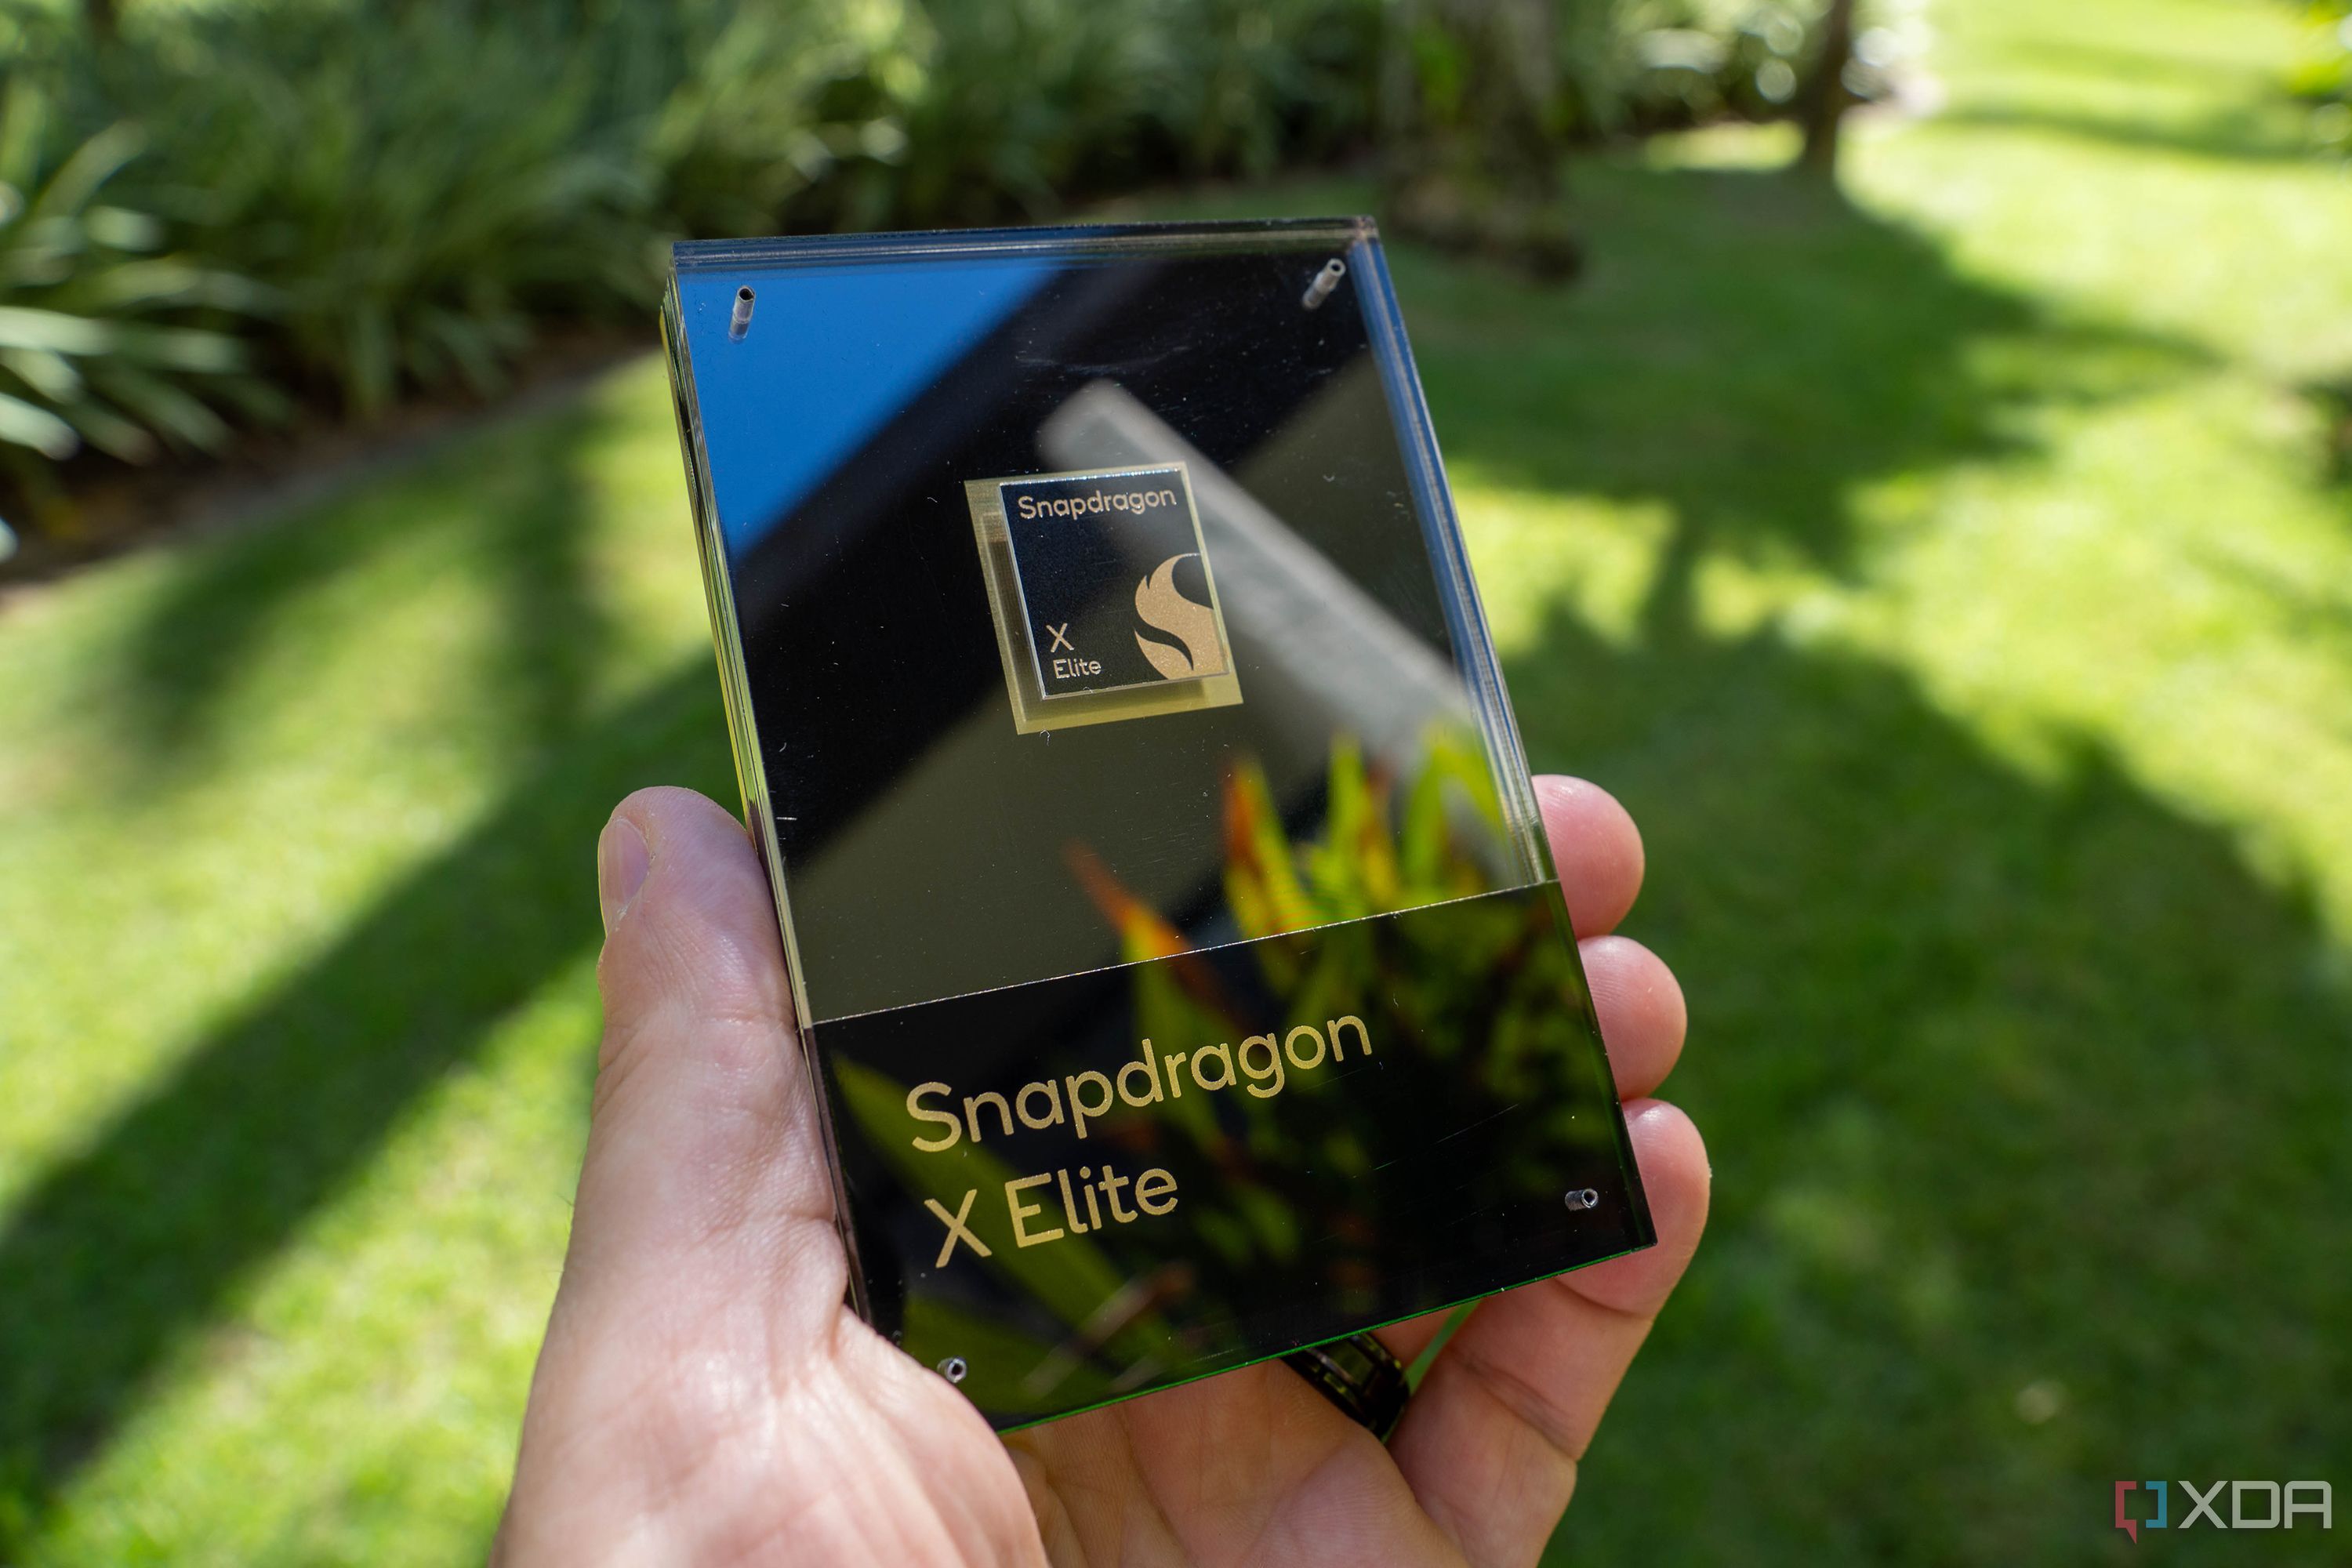 The Snapdragon X Elite will be a huge step forward for Windows here's why